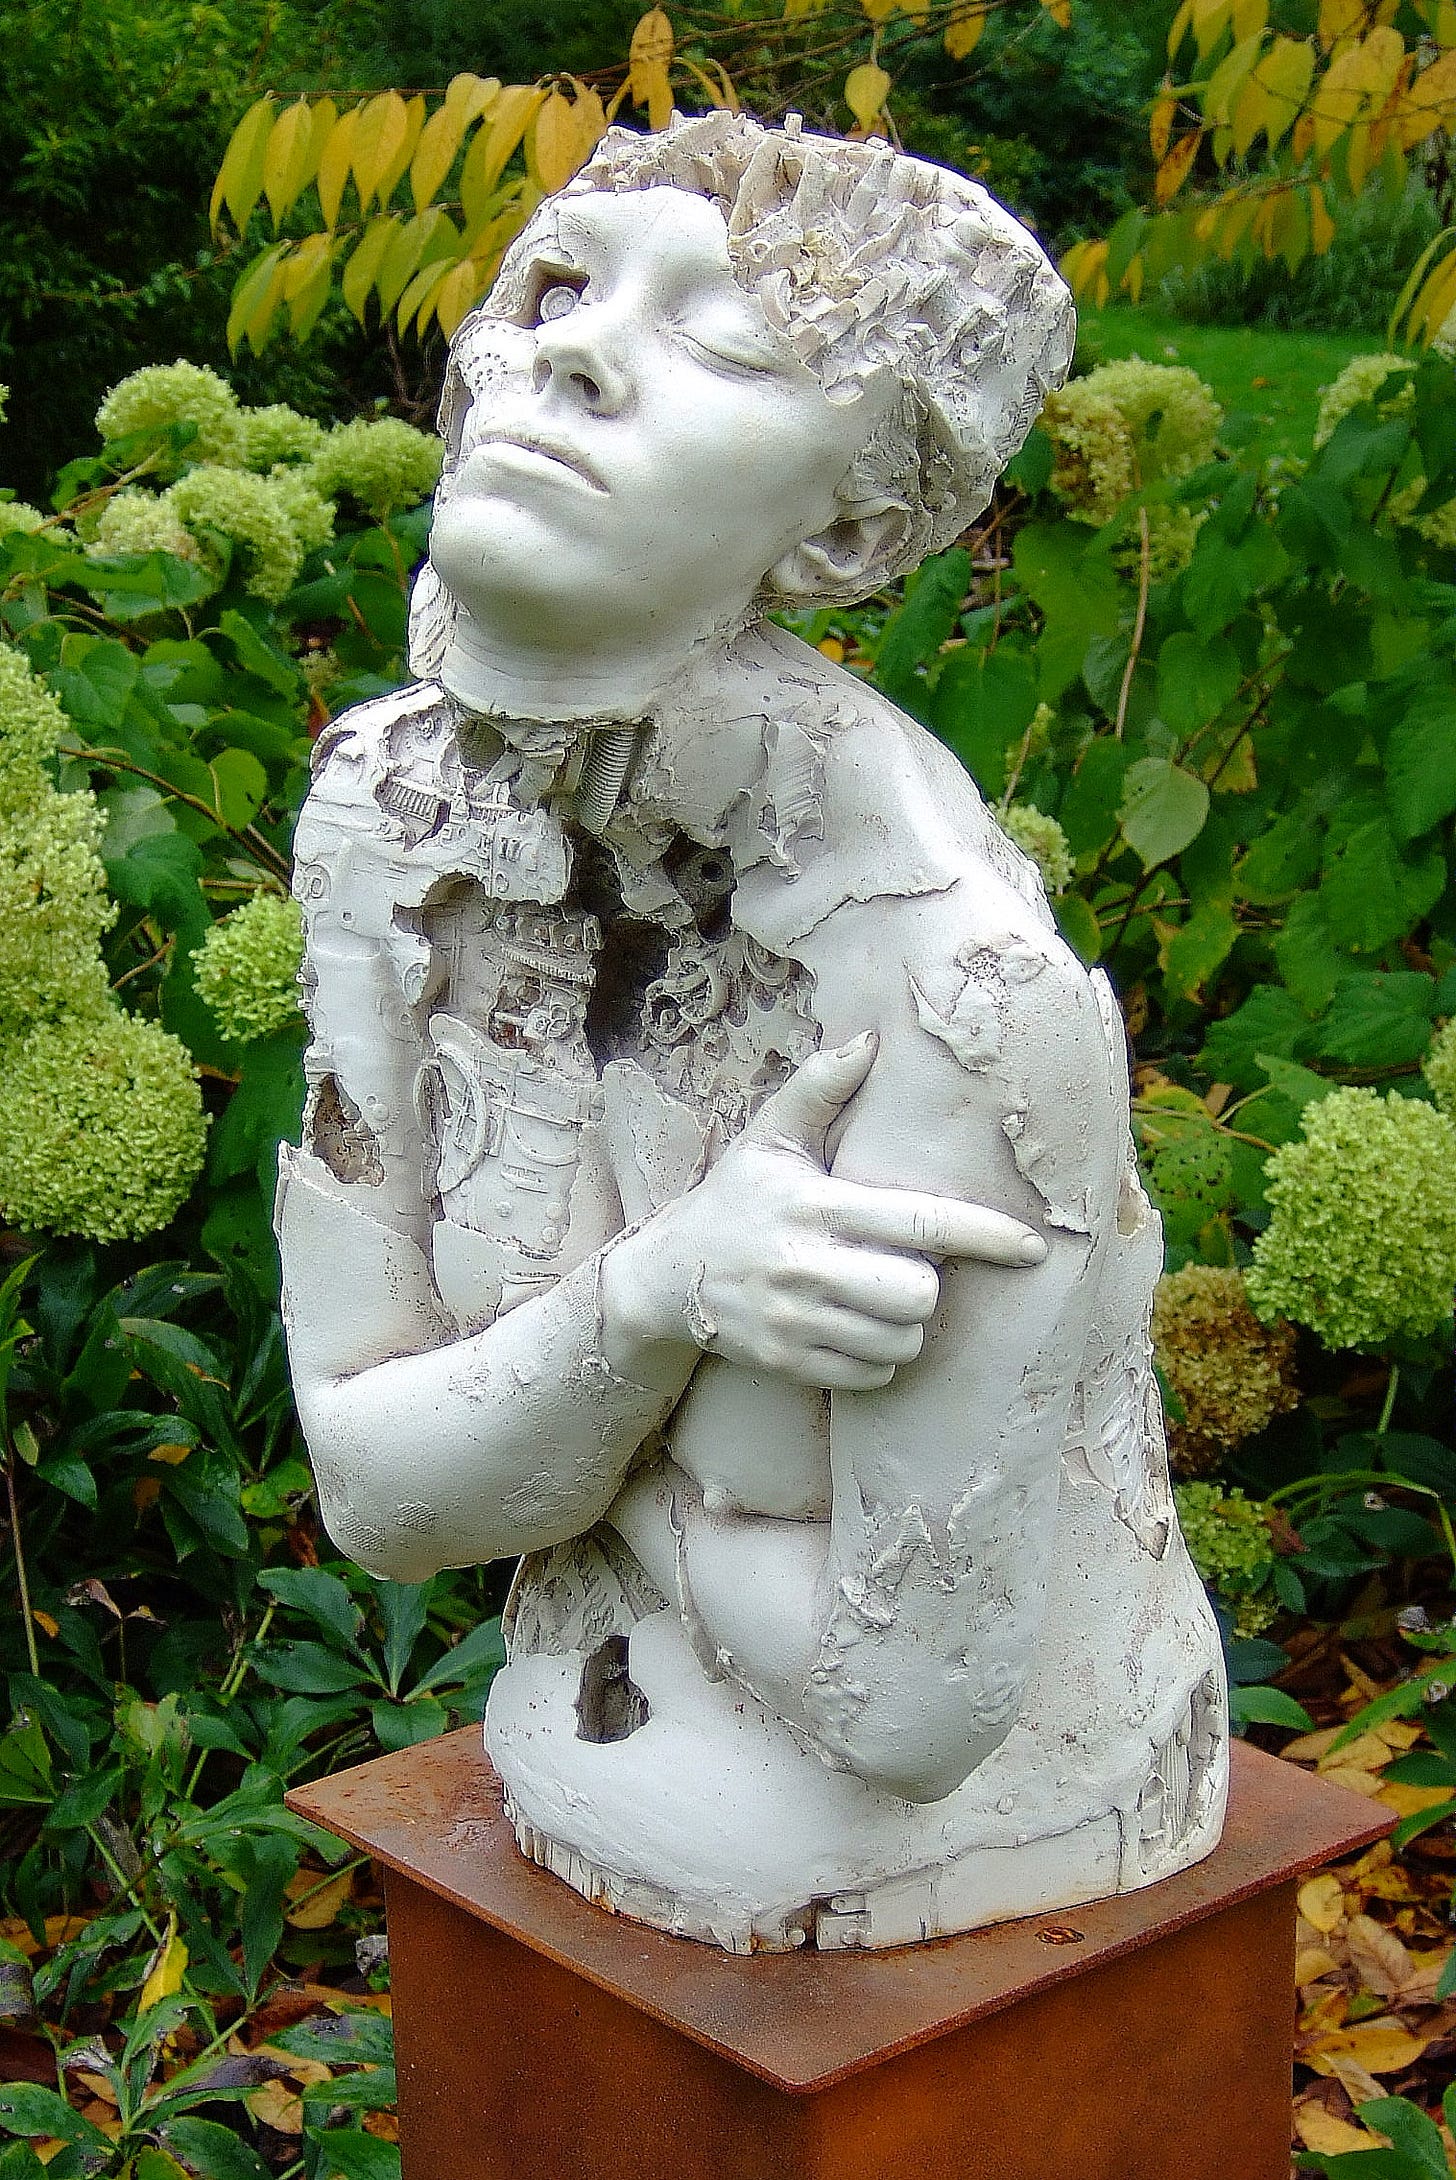 A photograph of a marble resin sculpture of a cyborg mounted on a simple wooden plinth stood in a garden setting. The concepts of time and discovery are intended to be portrayed in this sculptural work. Machine made objects creating mechanical textures have been fused with a human form cast from life. The skin has eroded in areas to reveal mechanical systems analogous to the internal workings of the body.